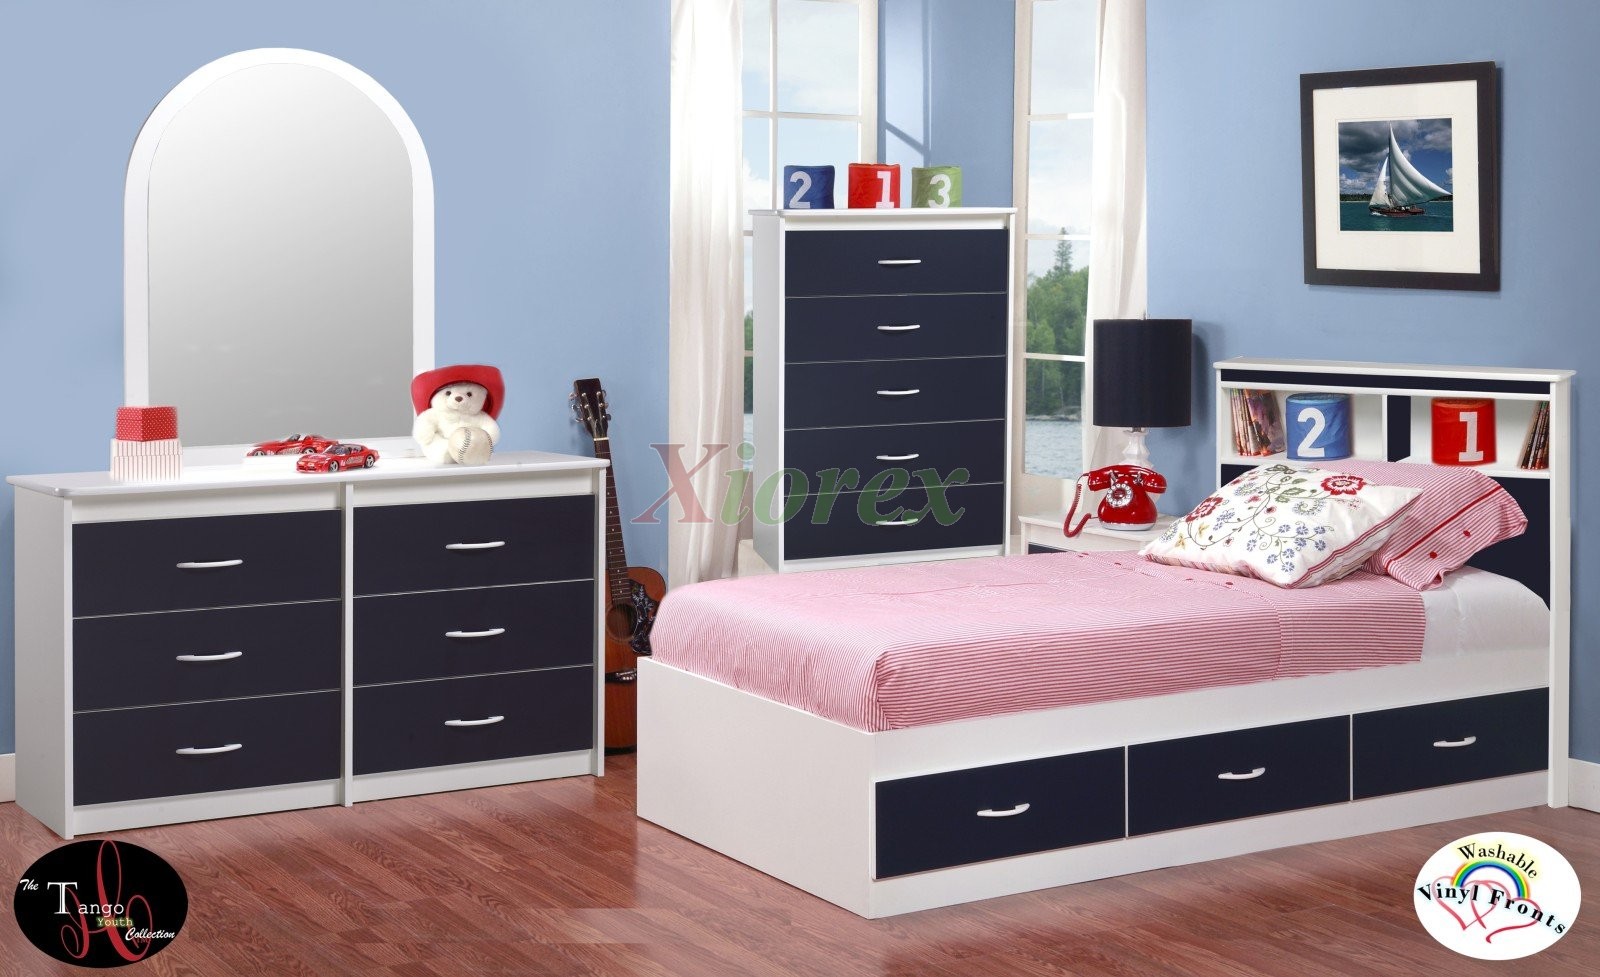 Life Line Tango Mates Beds Twin Full, Boles Full Mate S Bed With 12 Drawers And Bookcase